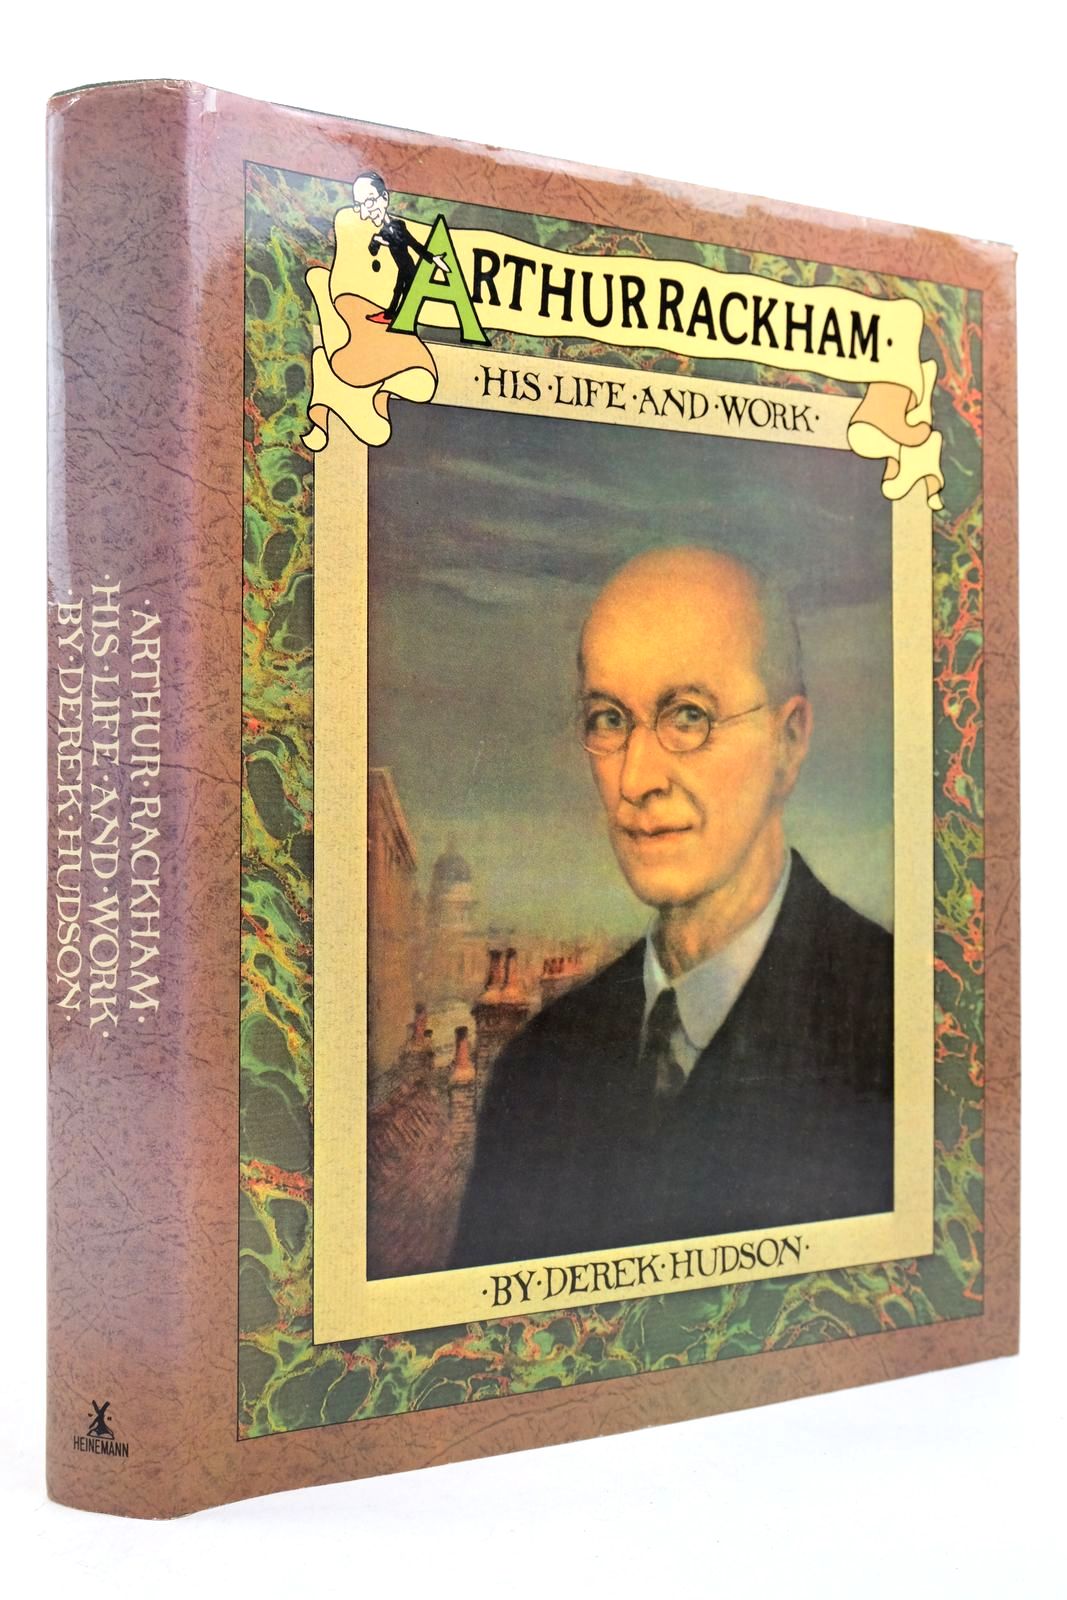 Photo of ARTHUR RACKHAM HIS LIFE AND WORK written by Hudson, Derek illustrated by Rackham, Arthur published by William Heinemann Ltd. (STOCK CODE: 2140161)  for sale by Stella & Rose's Books